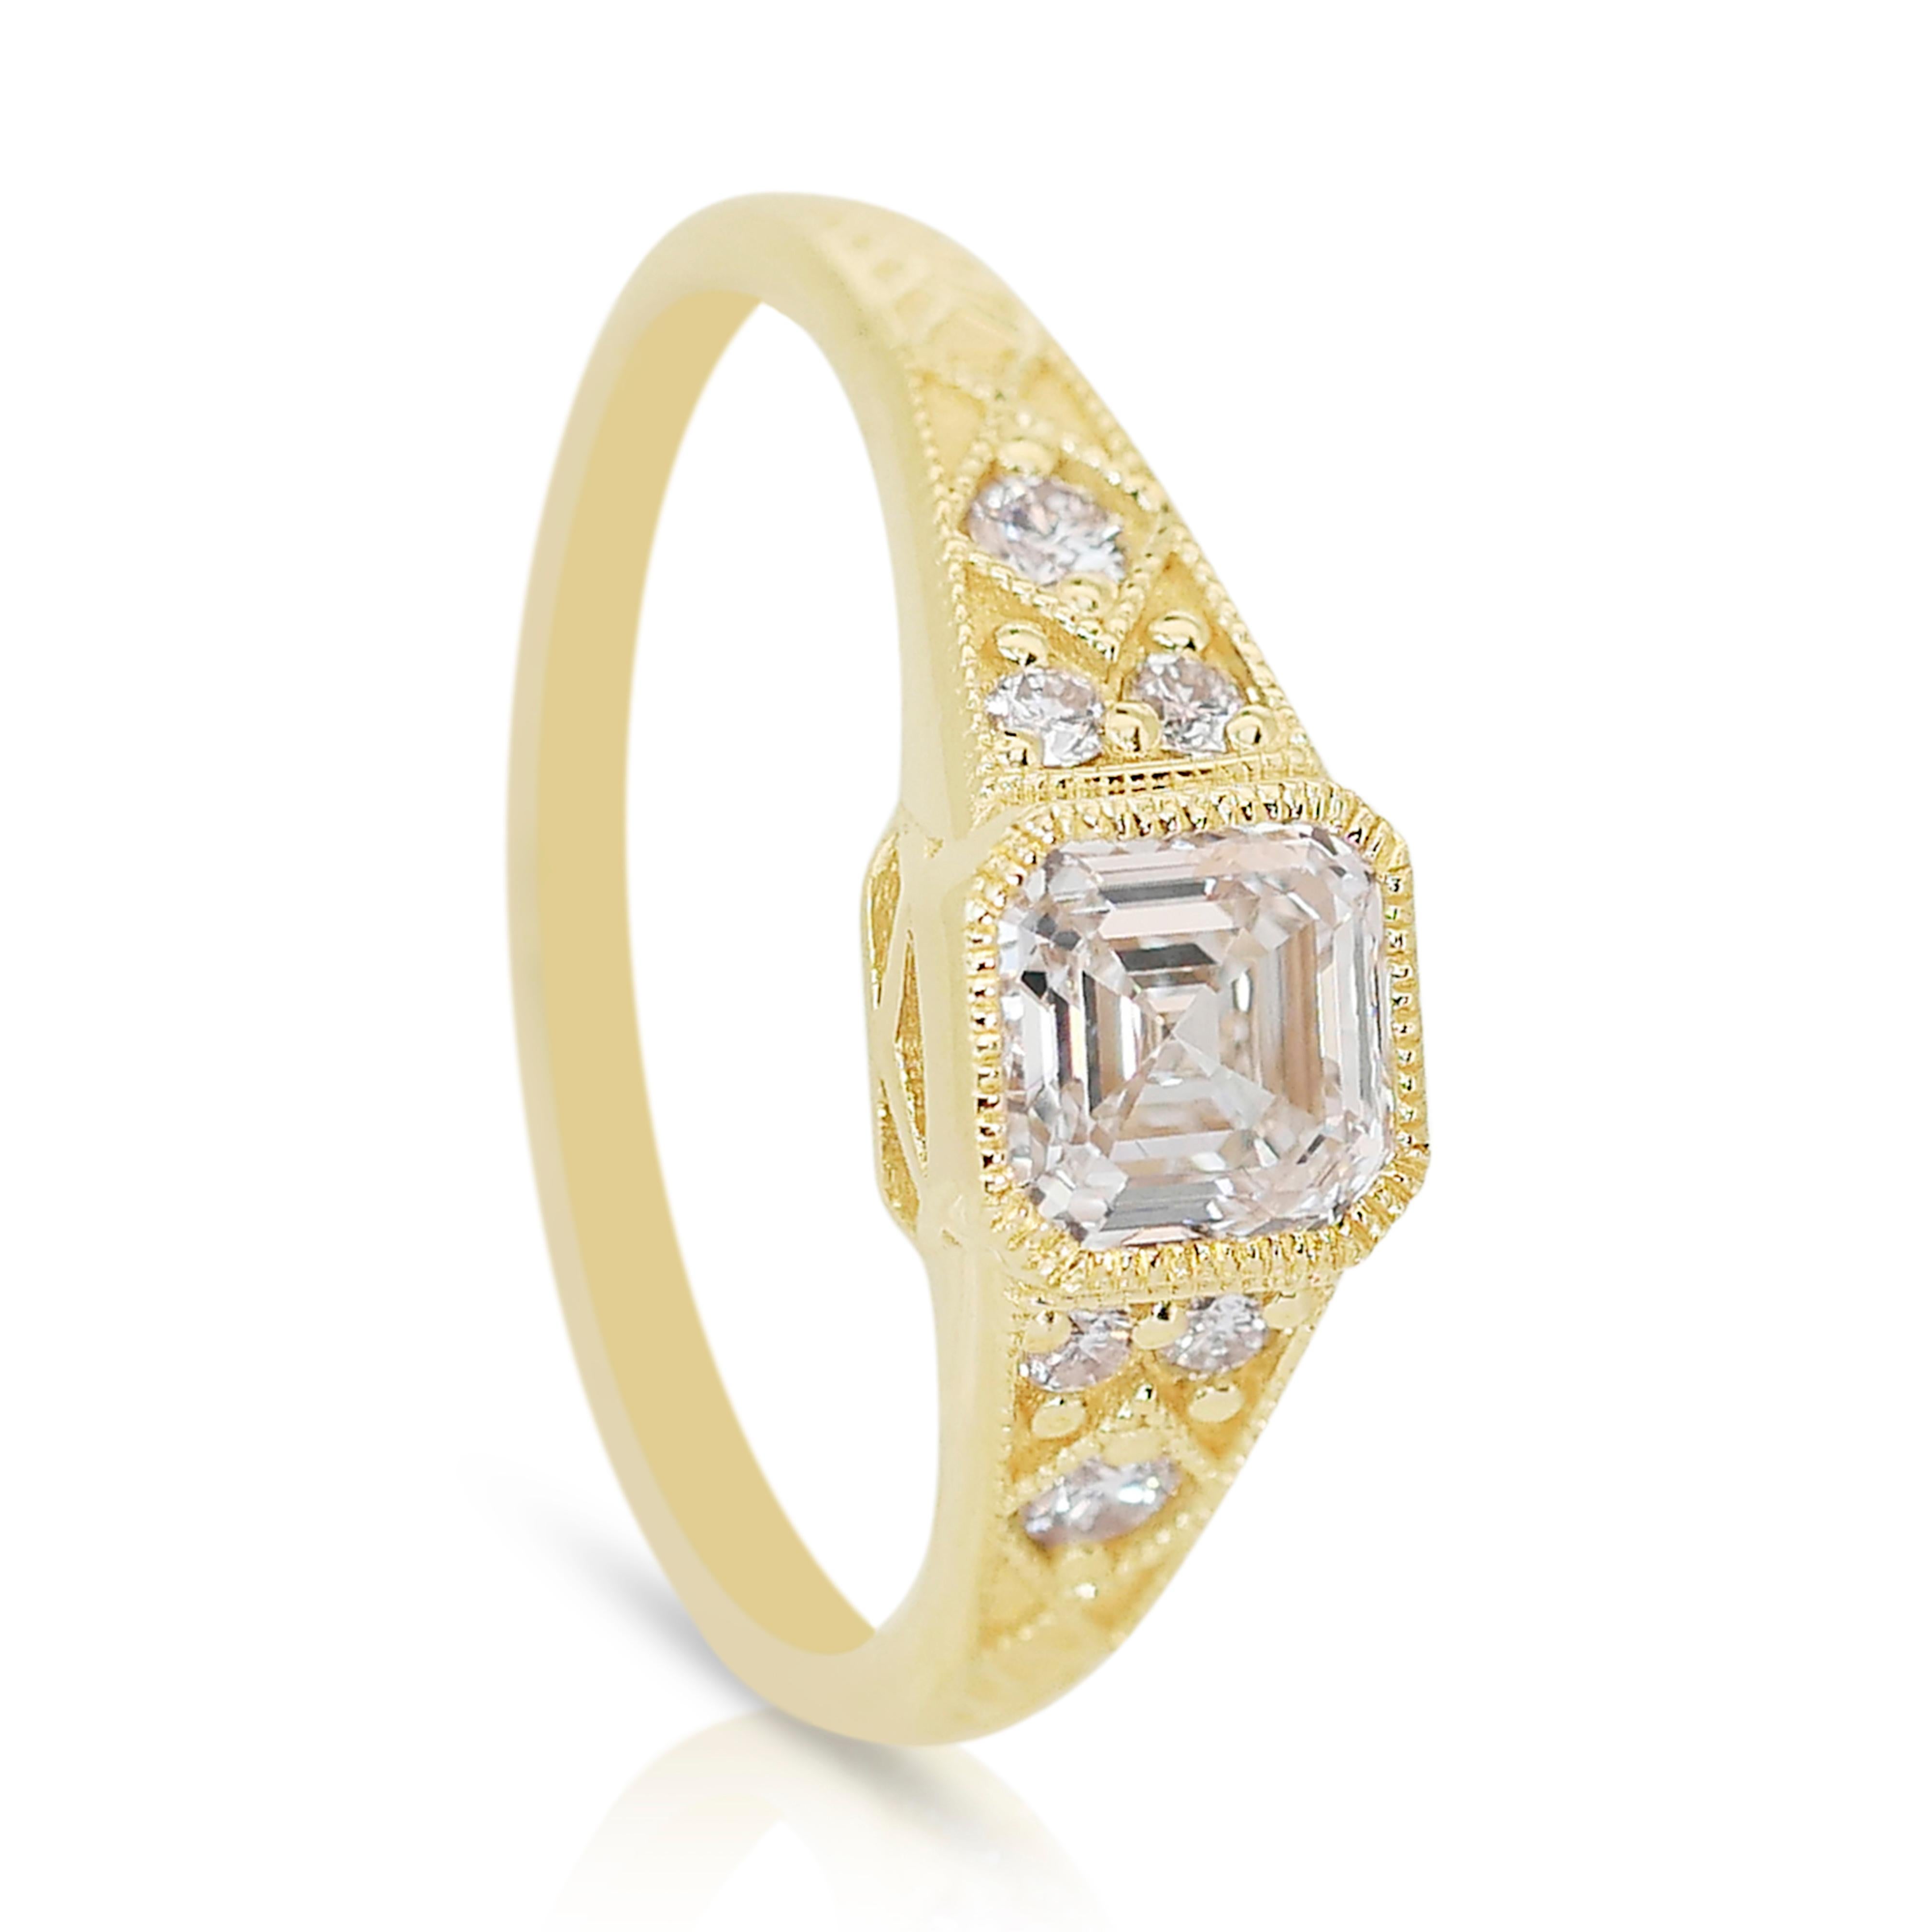 Beautiful 1.17ct Diamonds Pave Ring in 18k Yellow Gold - GIA Certified For Sale 2